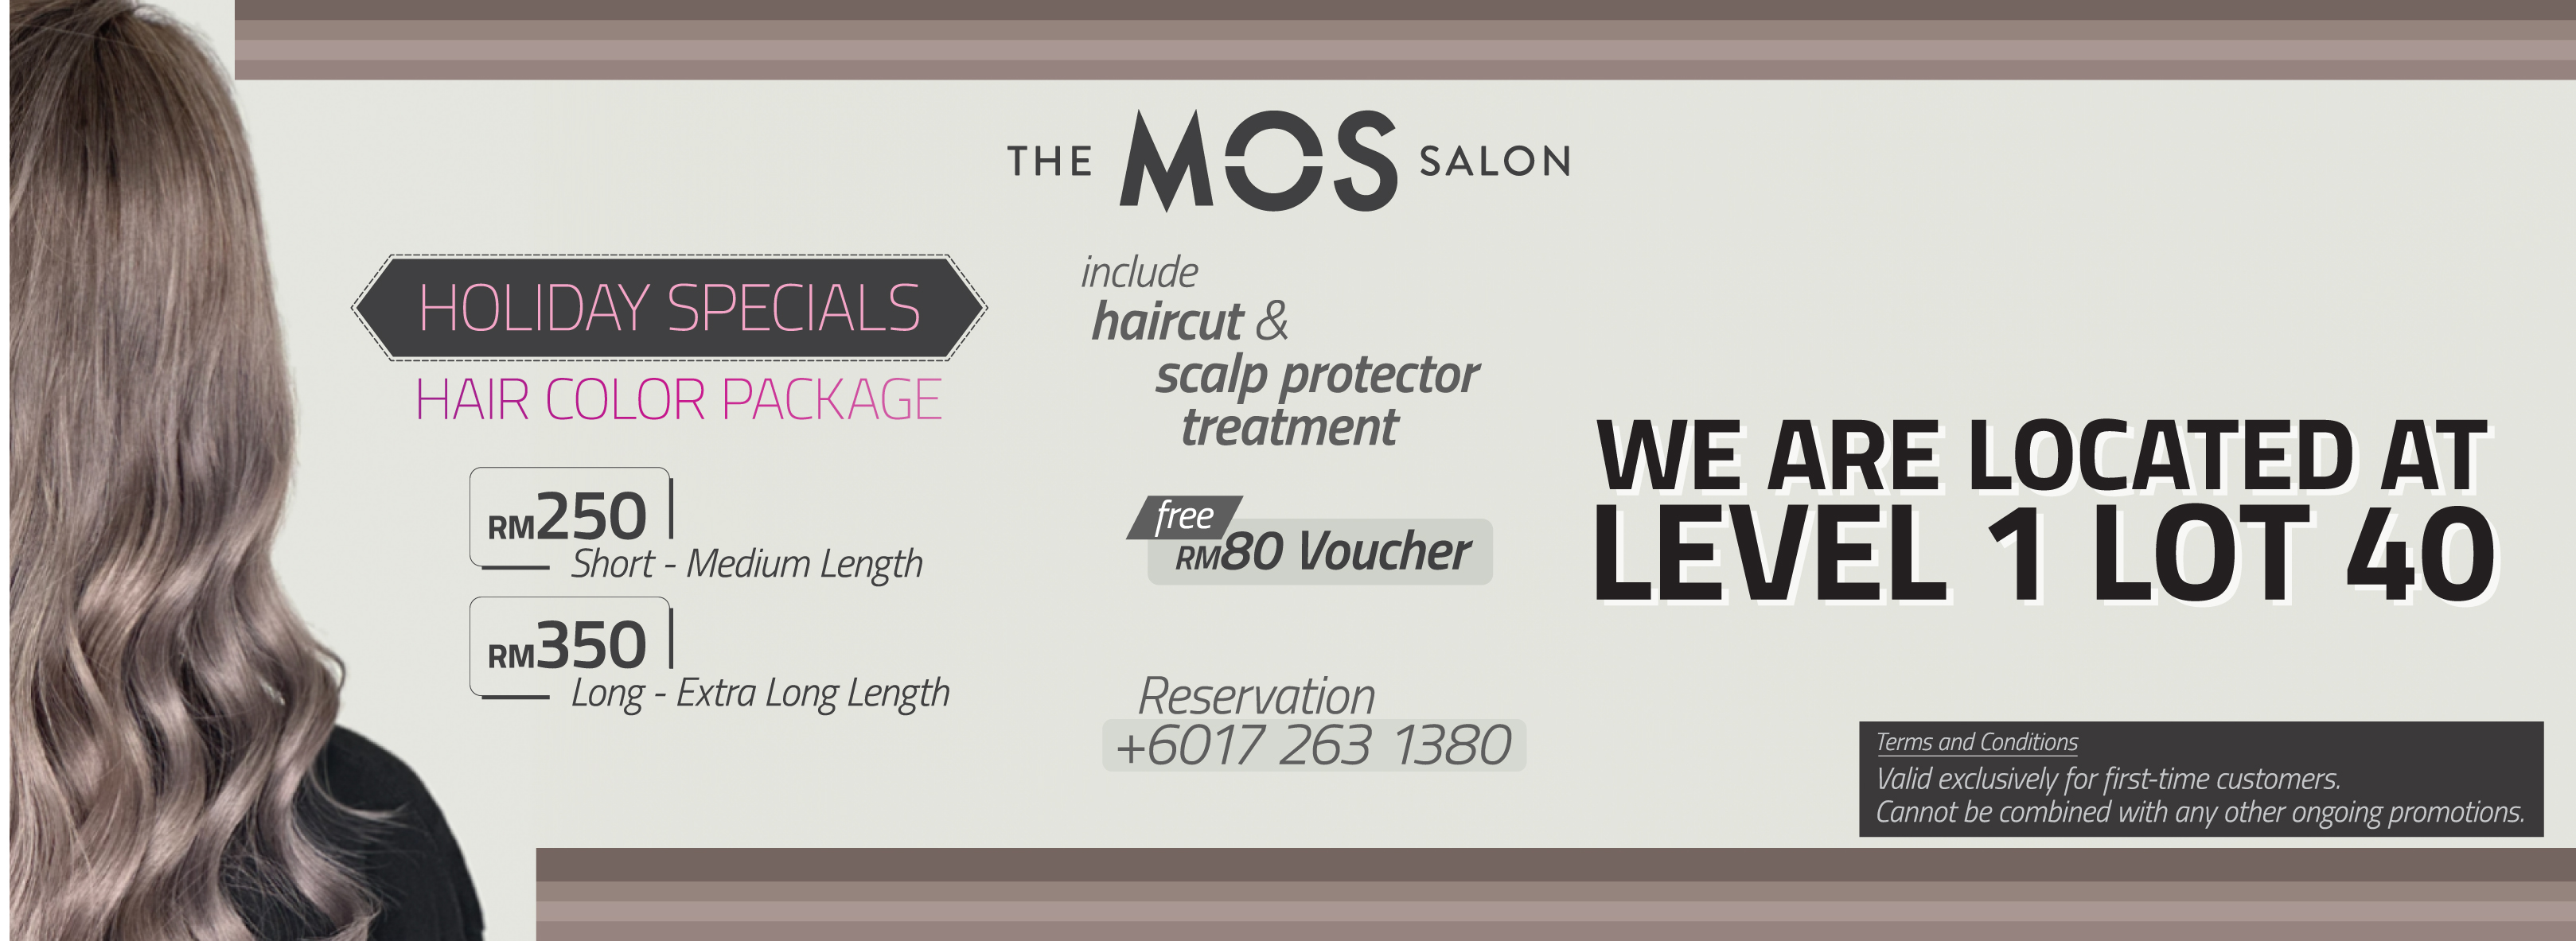 Tropicana Gardens Mall The MOS Salon Holiday Specials Hair Color Package